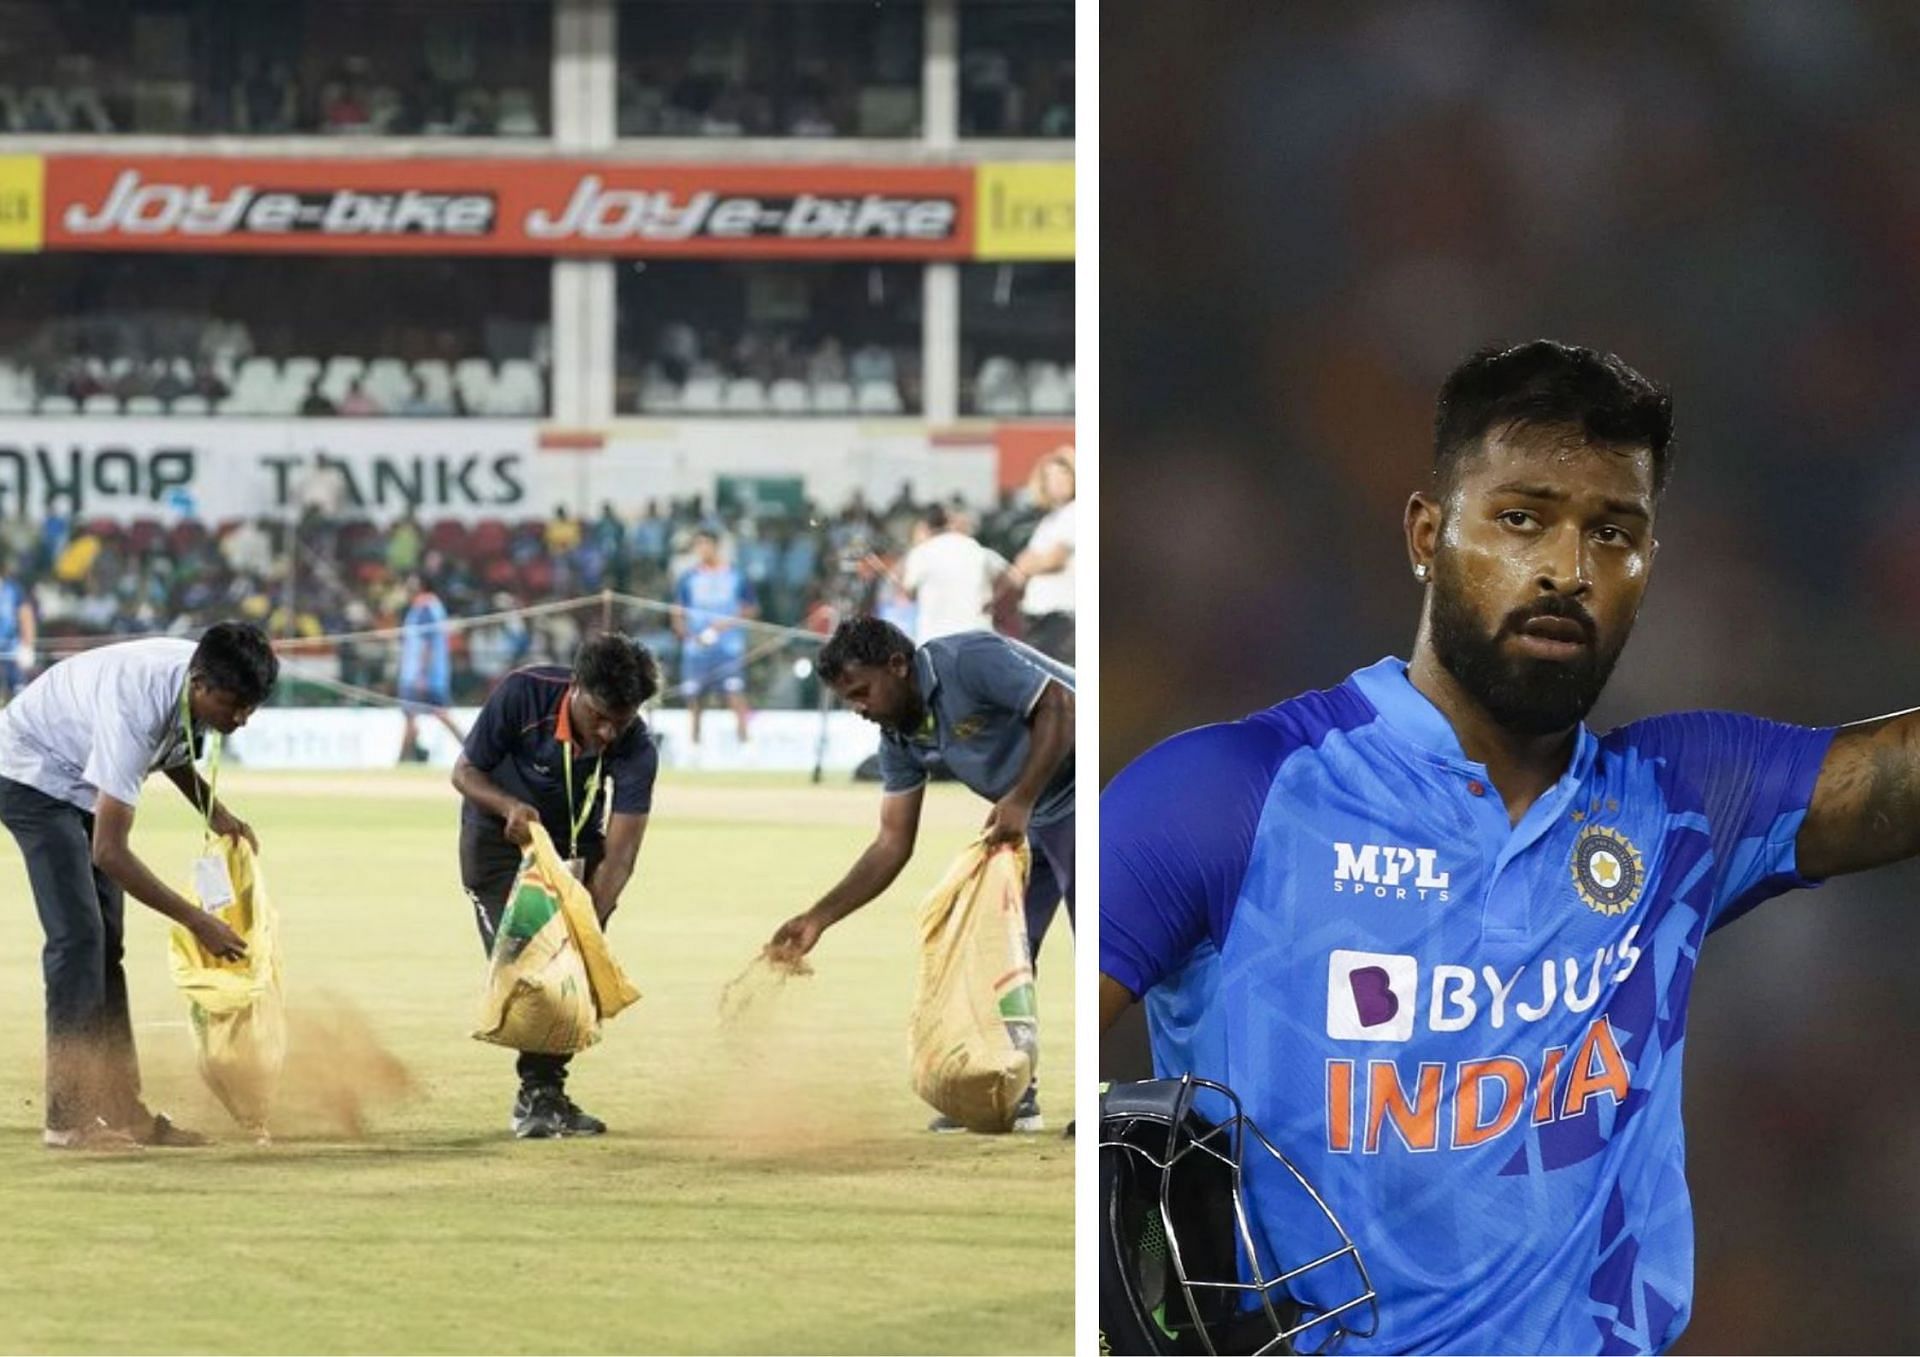 Hardik Pandya had special words of gratitude for the groundstaff at the VCA Stadium (Picture Credits: Twitter/Hardik Pandya; Getty Images)